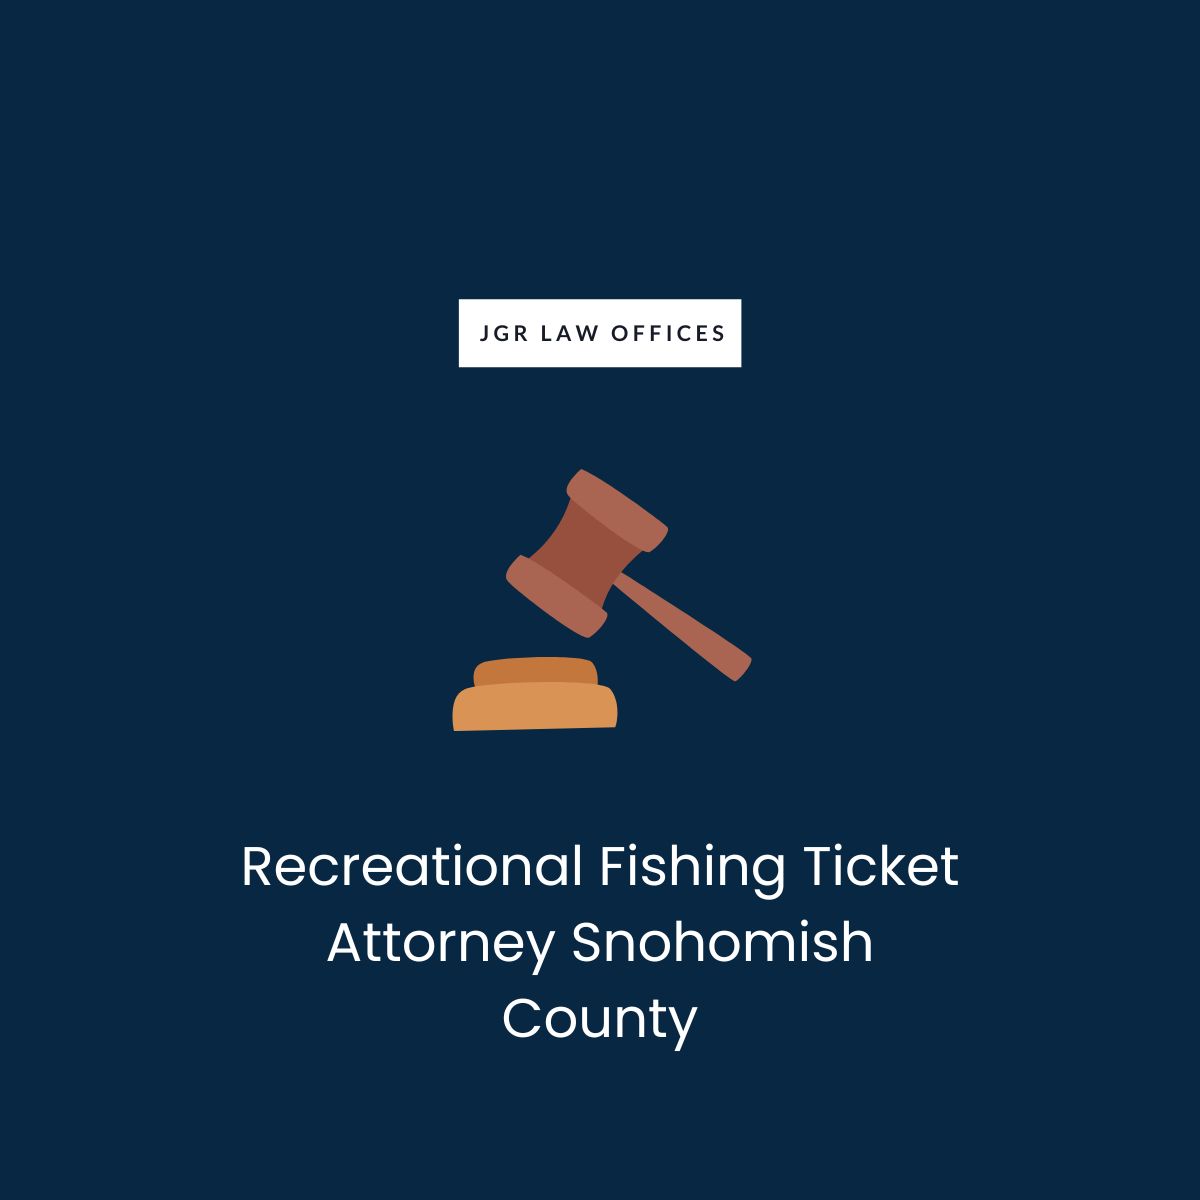 Recreational Fishing Ticket Attorney Snohomish County